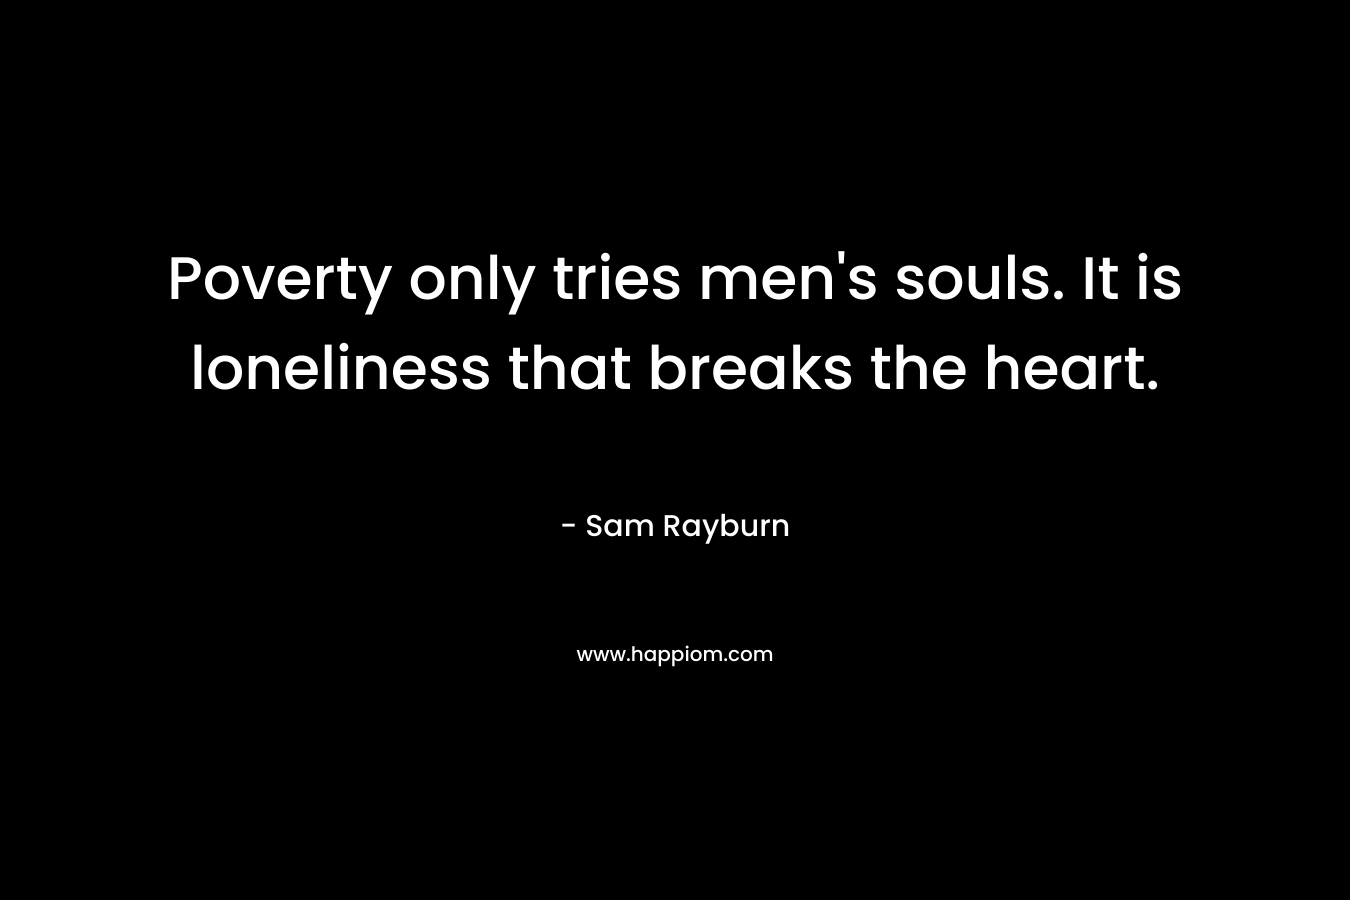 Poverty only tries men’s souls. It is loneliness that breaks the heart. – Sam Rayburn